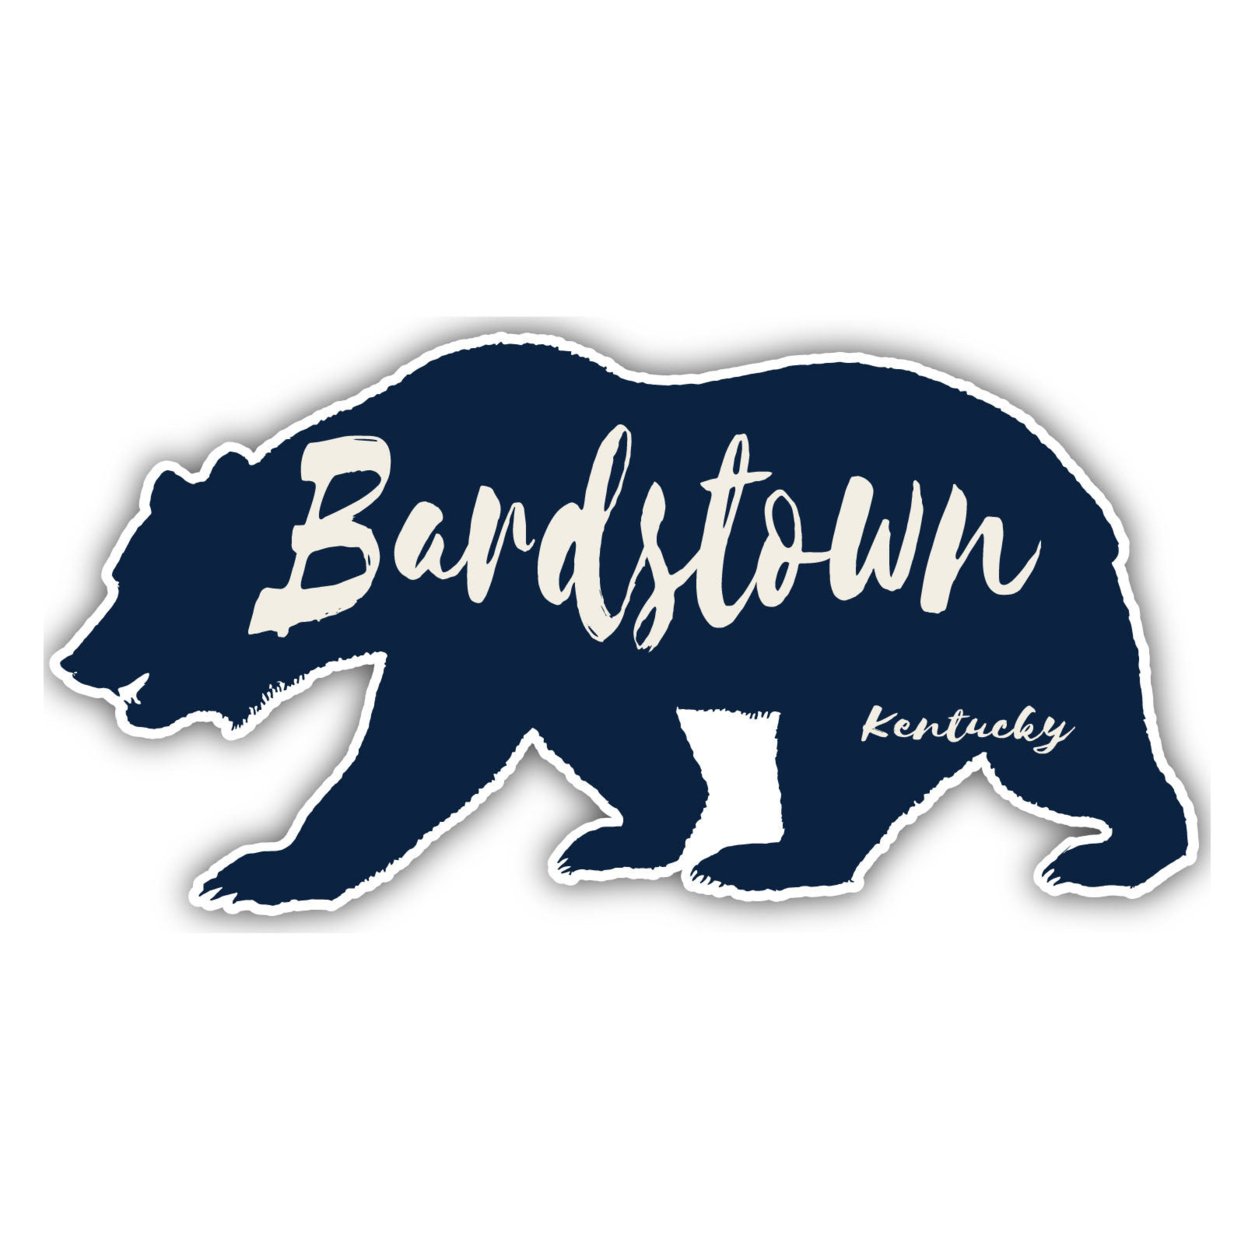 Bardstown Kentucky Souvenir Decorative Stickers (Choose Theme And Size) - 4-Pack, 10-Inch, Great Outdoors